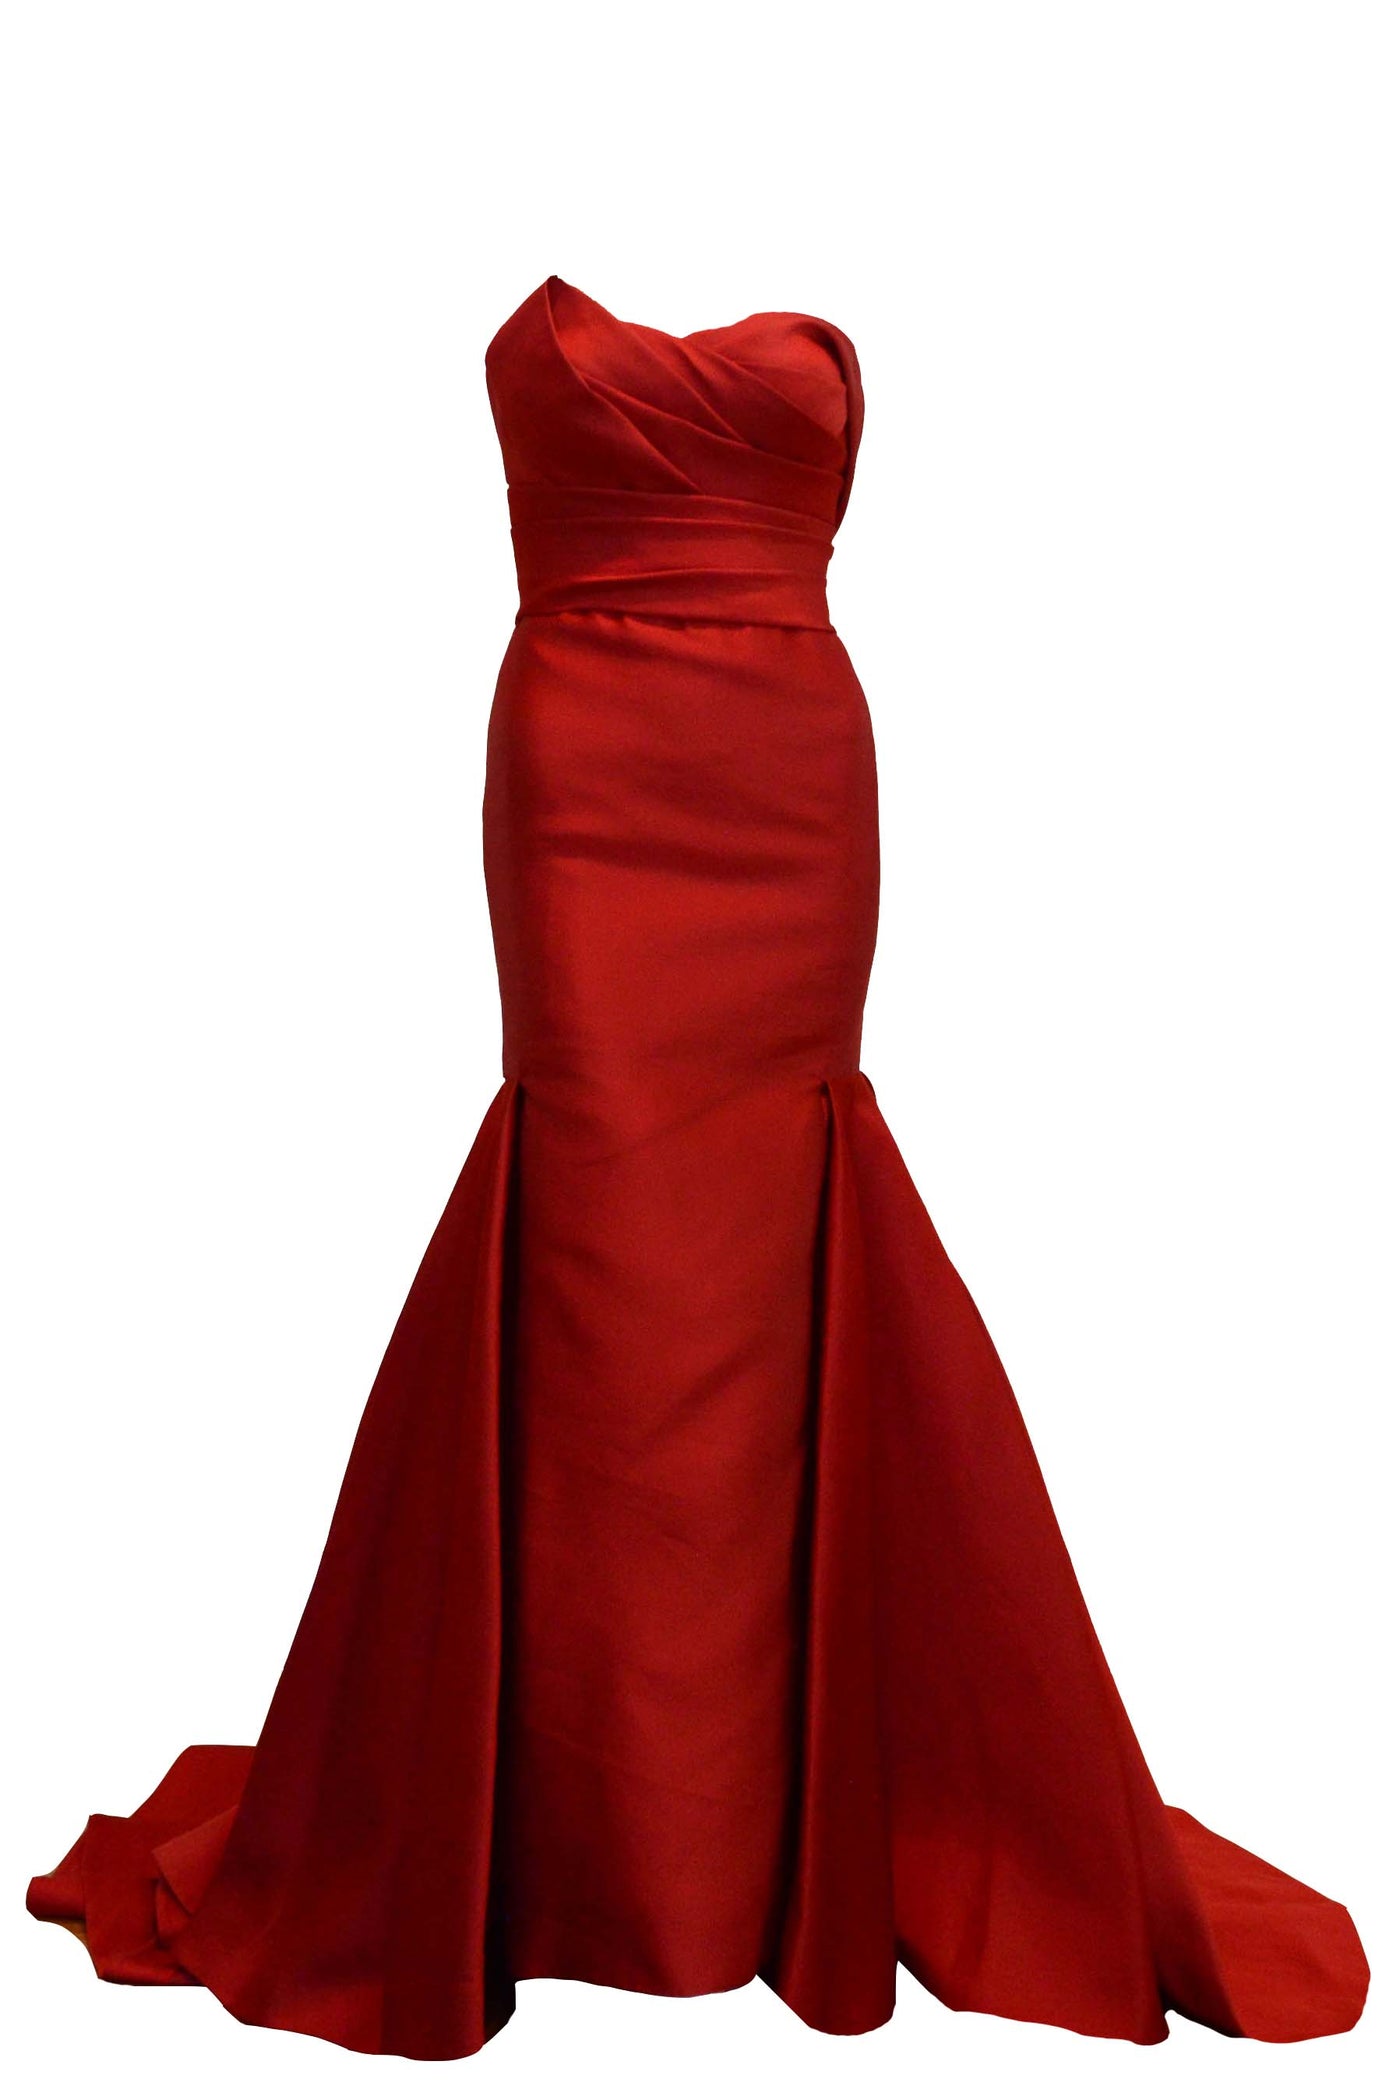 Sale: Adrian Gan Red Strapless Pleated Mermaid Gown